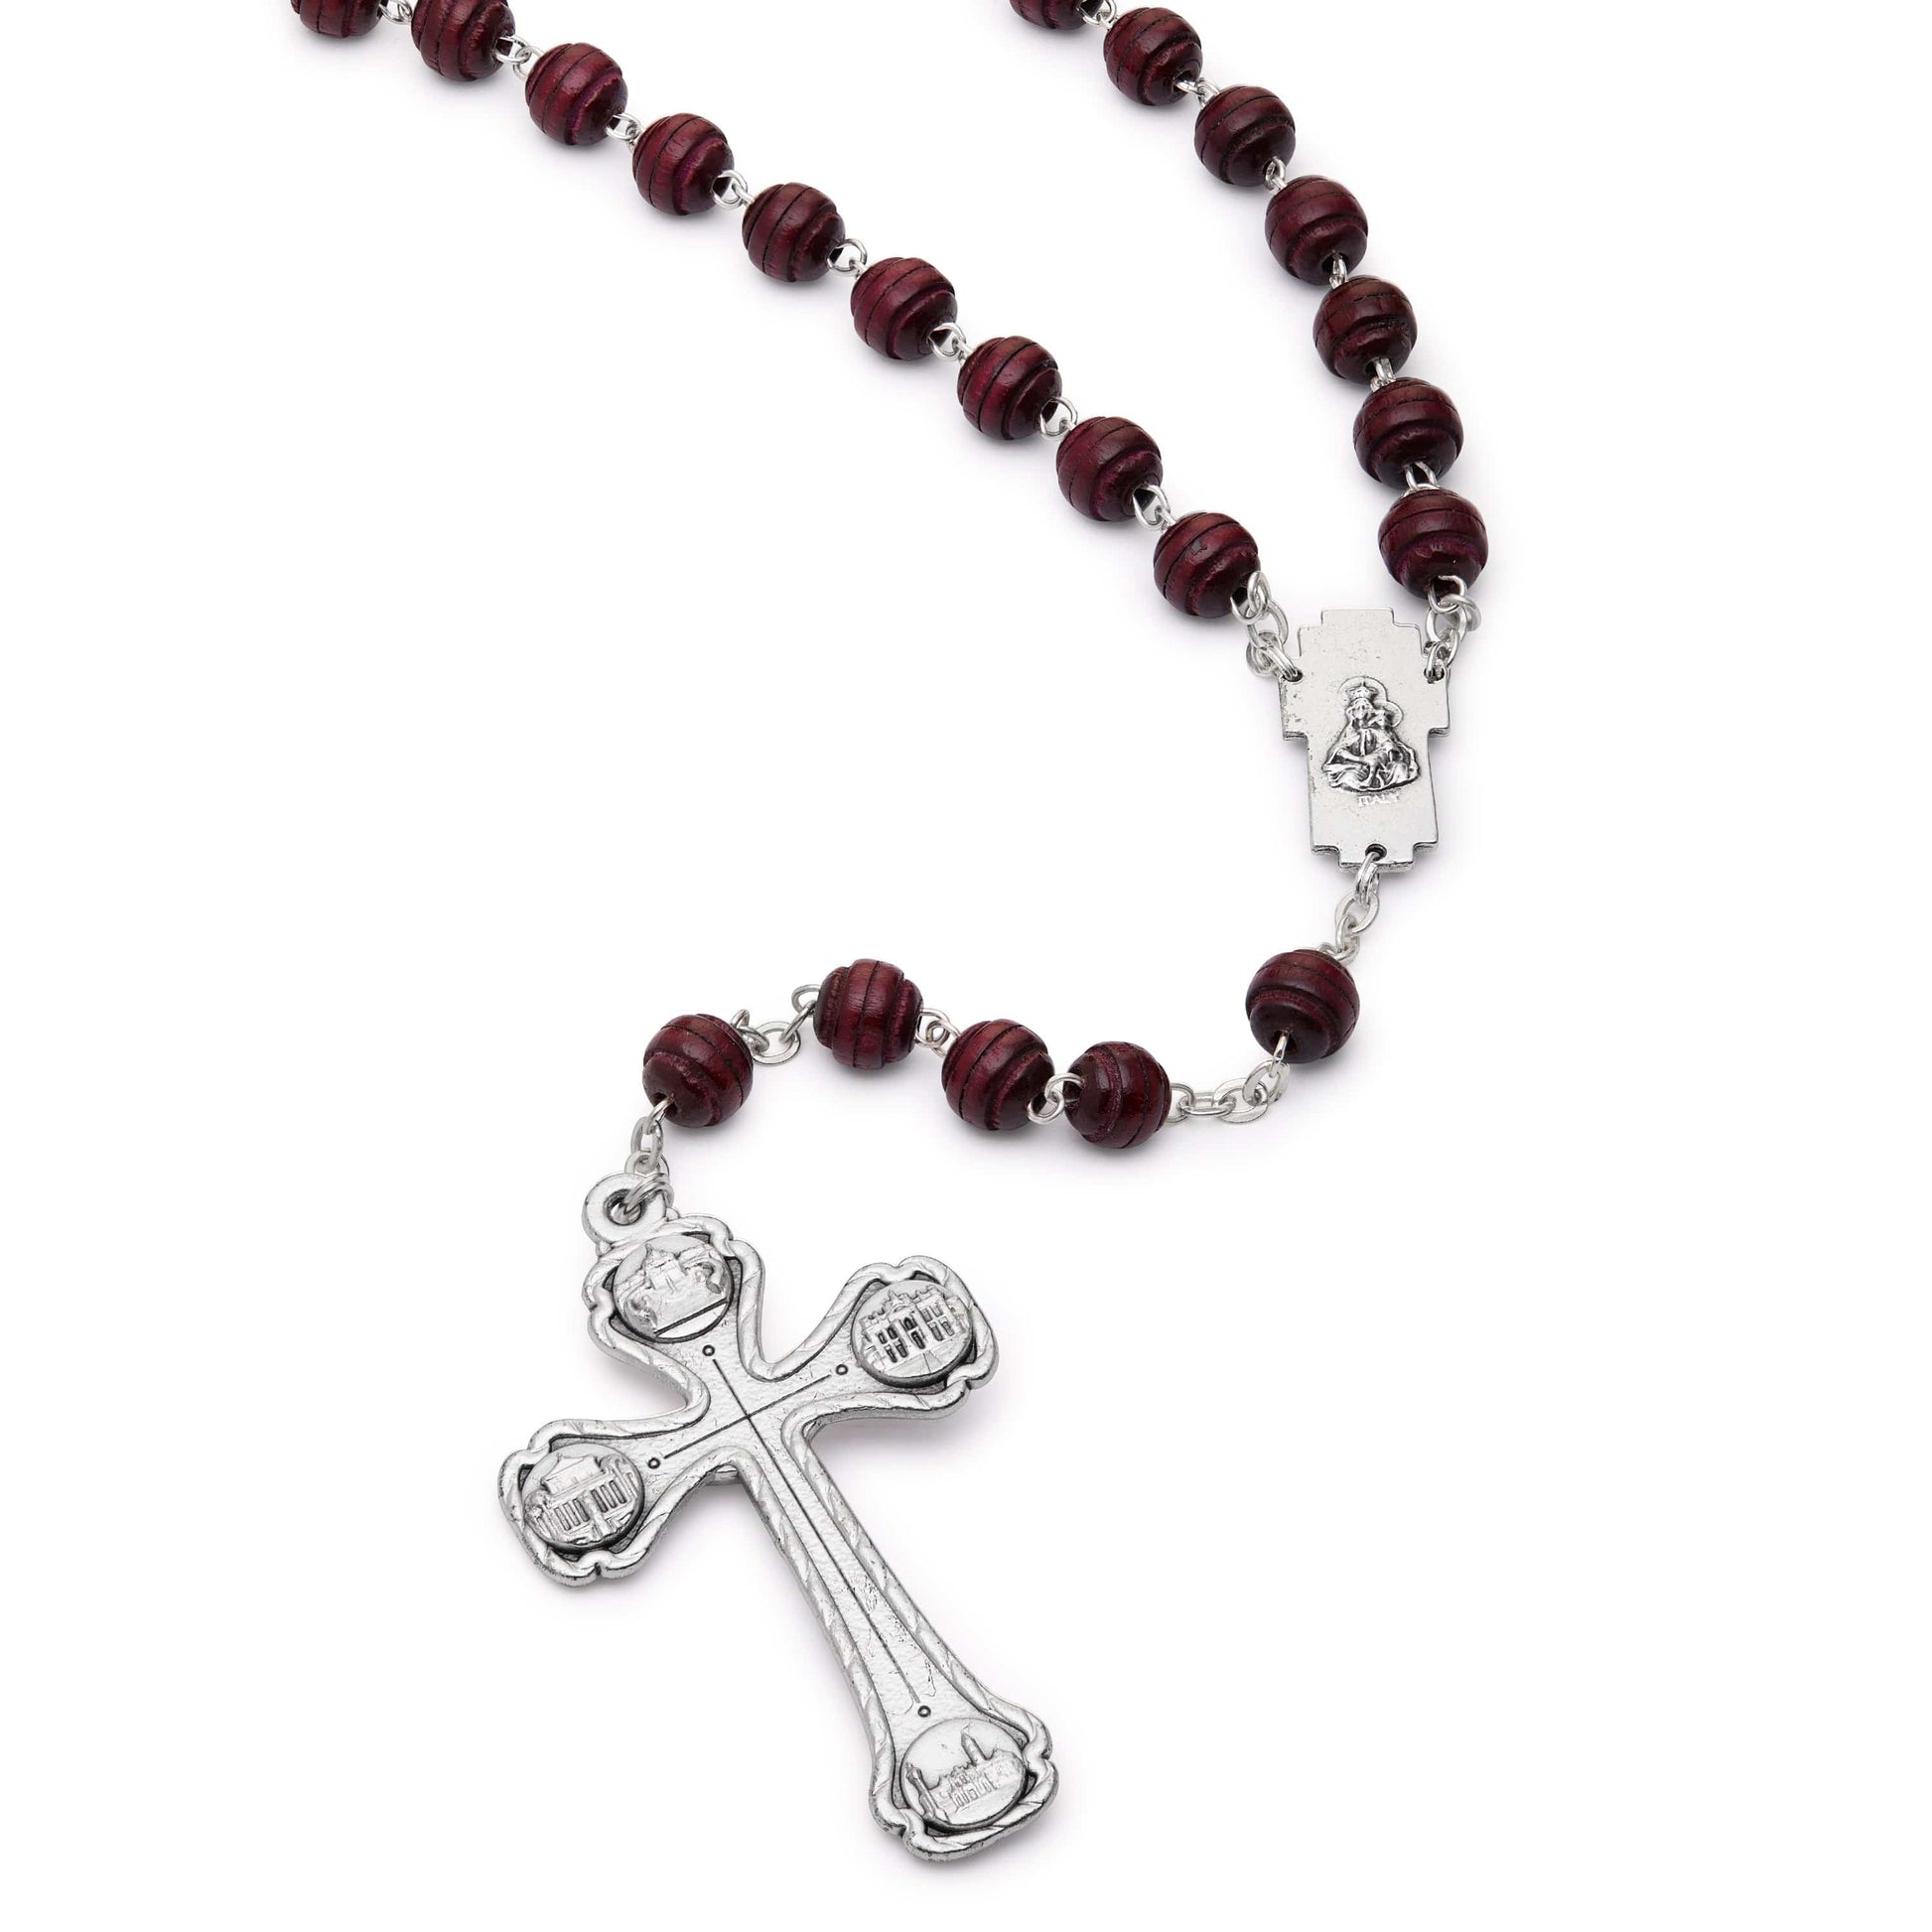 MONDO CATTOLICO Prayer Beads 51 cm (20.07 in) / 7 mm (0.27 in) Round Wooden Rosary Beads with the Four Basilicas